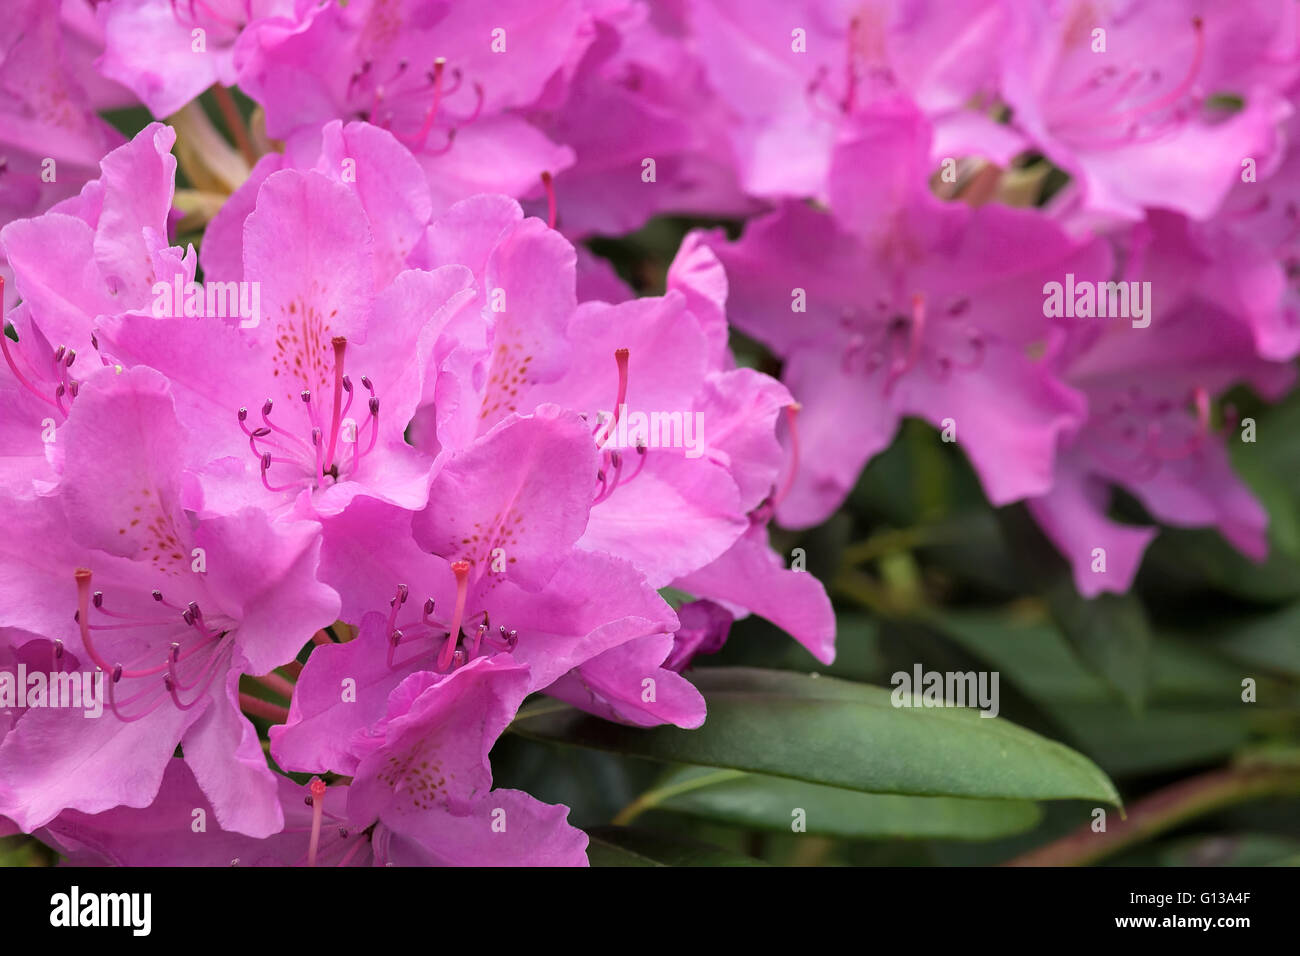 Pink Rhododendron plant flowers in bloom during spring season closeup Stock Photo